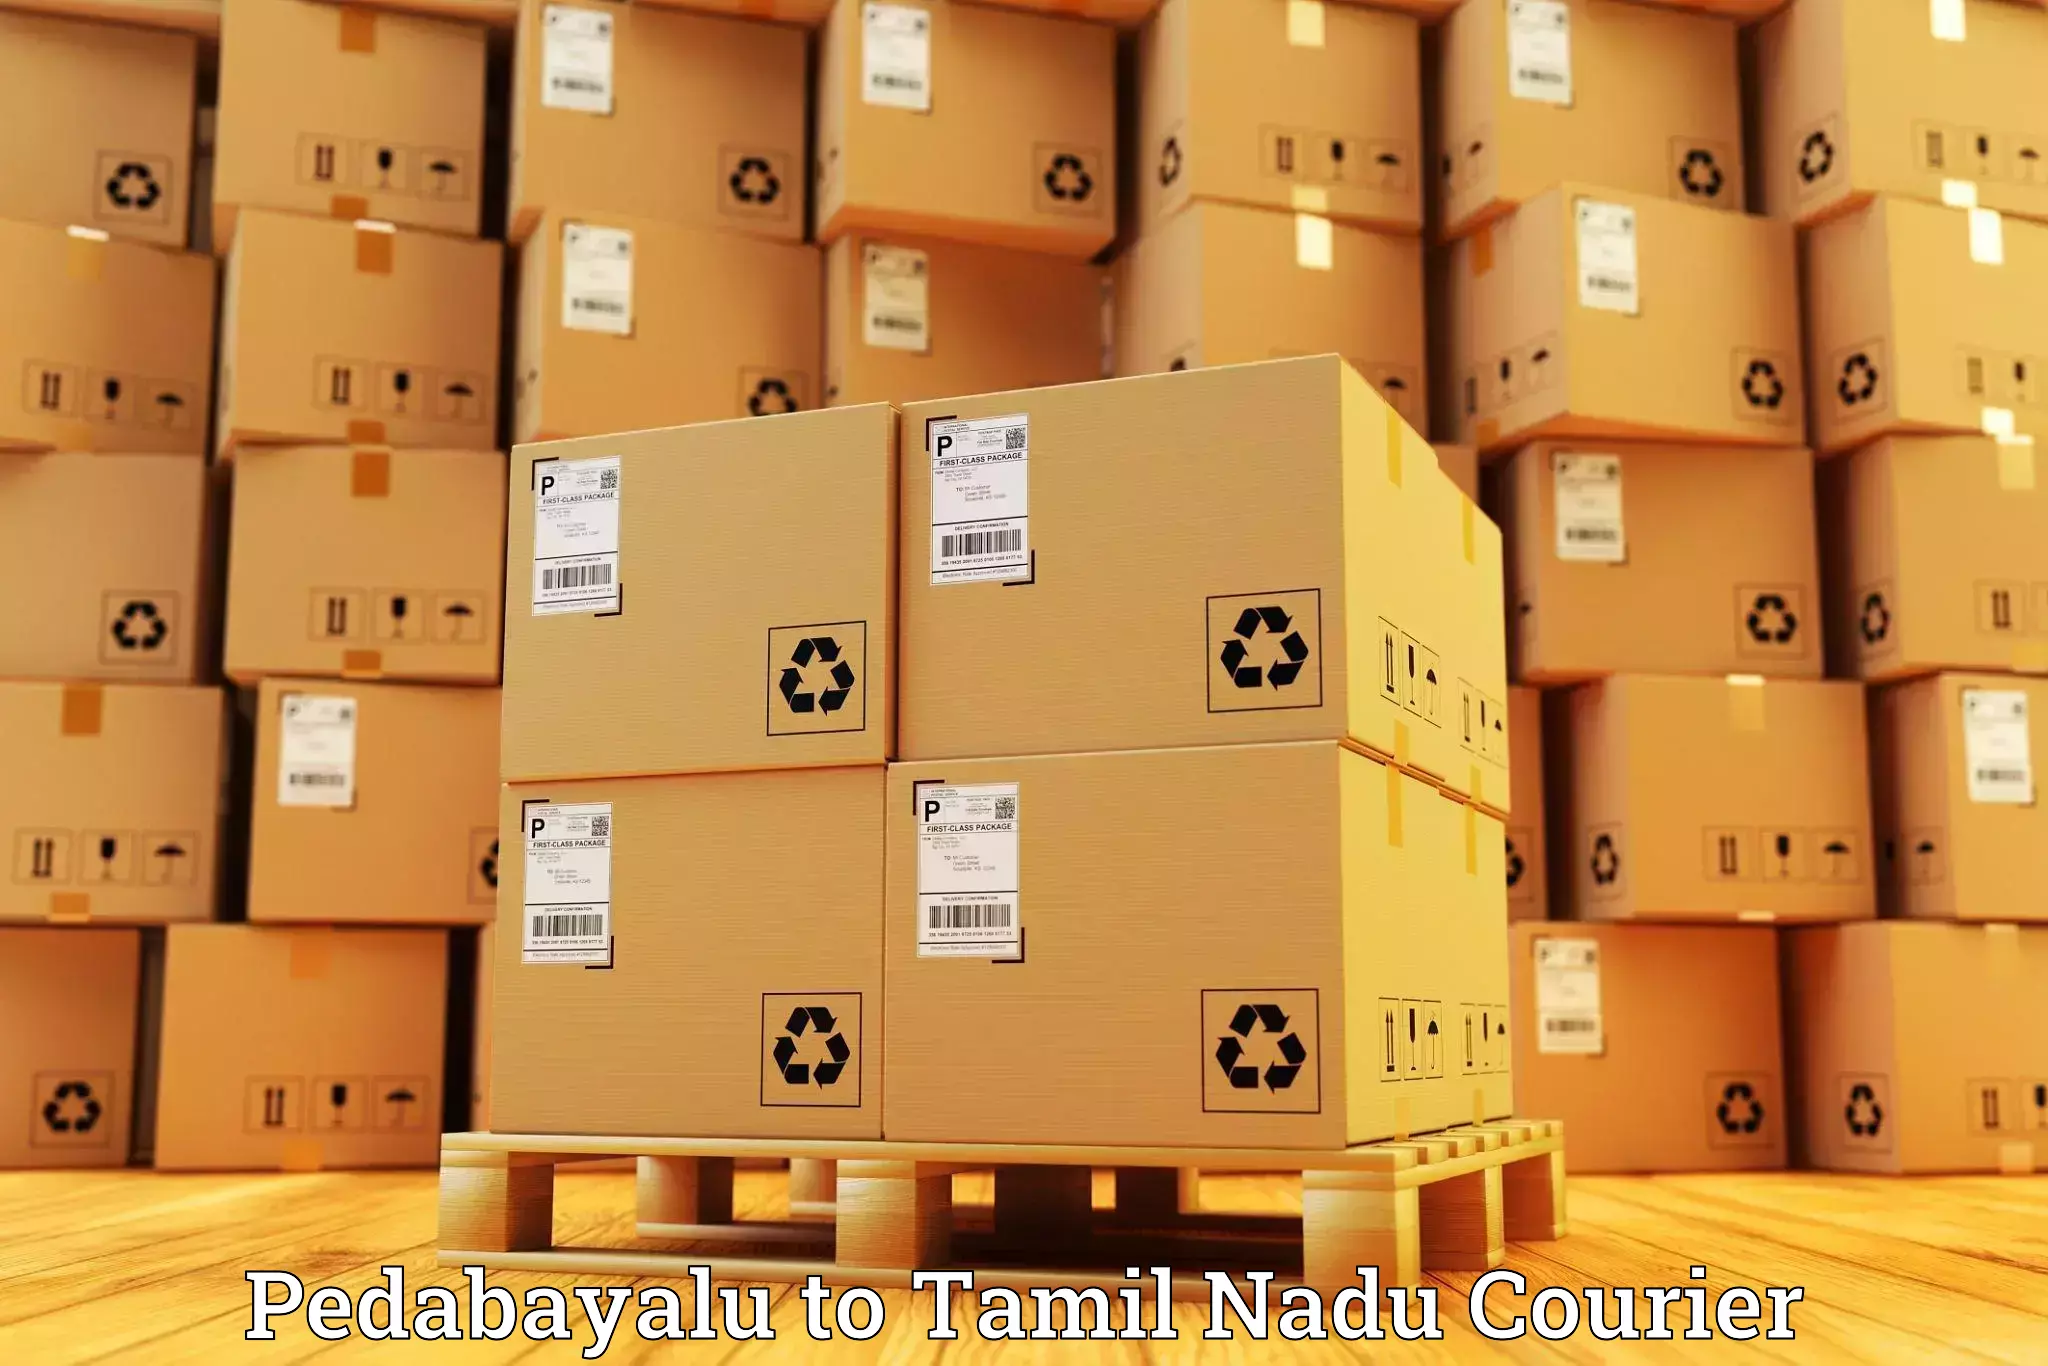 Premium courier services Pedabayalu to Meenakshi Academy of Higher Education and Research Chennai